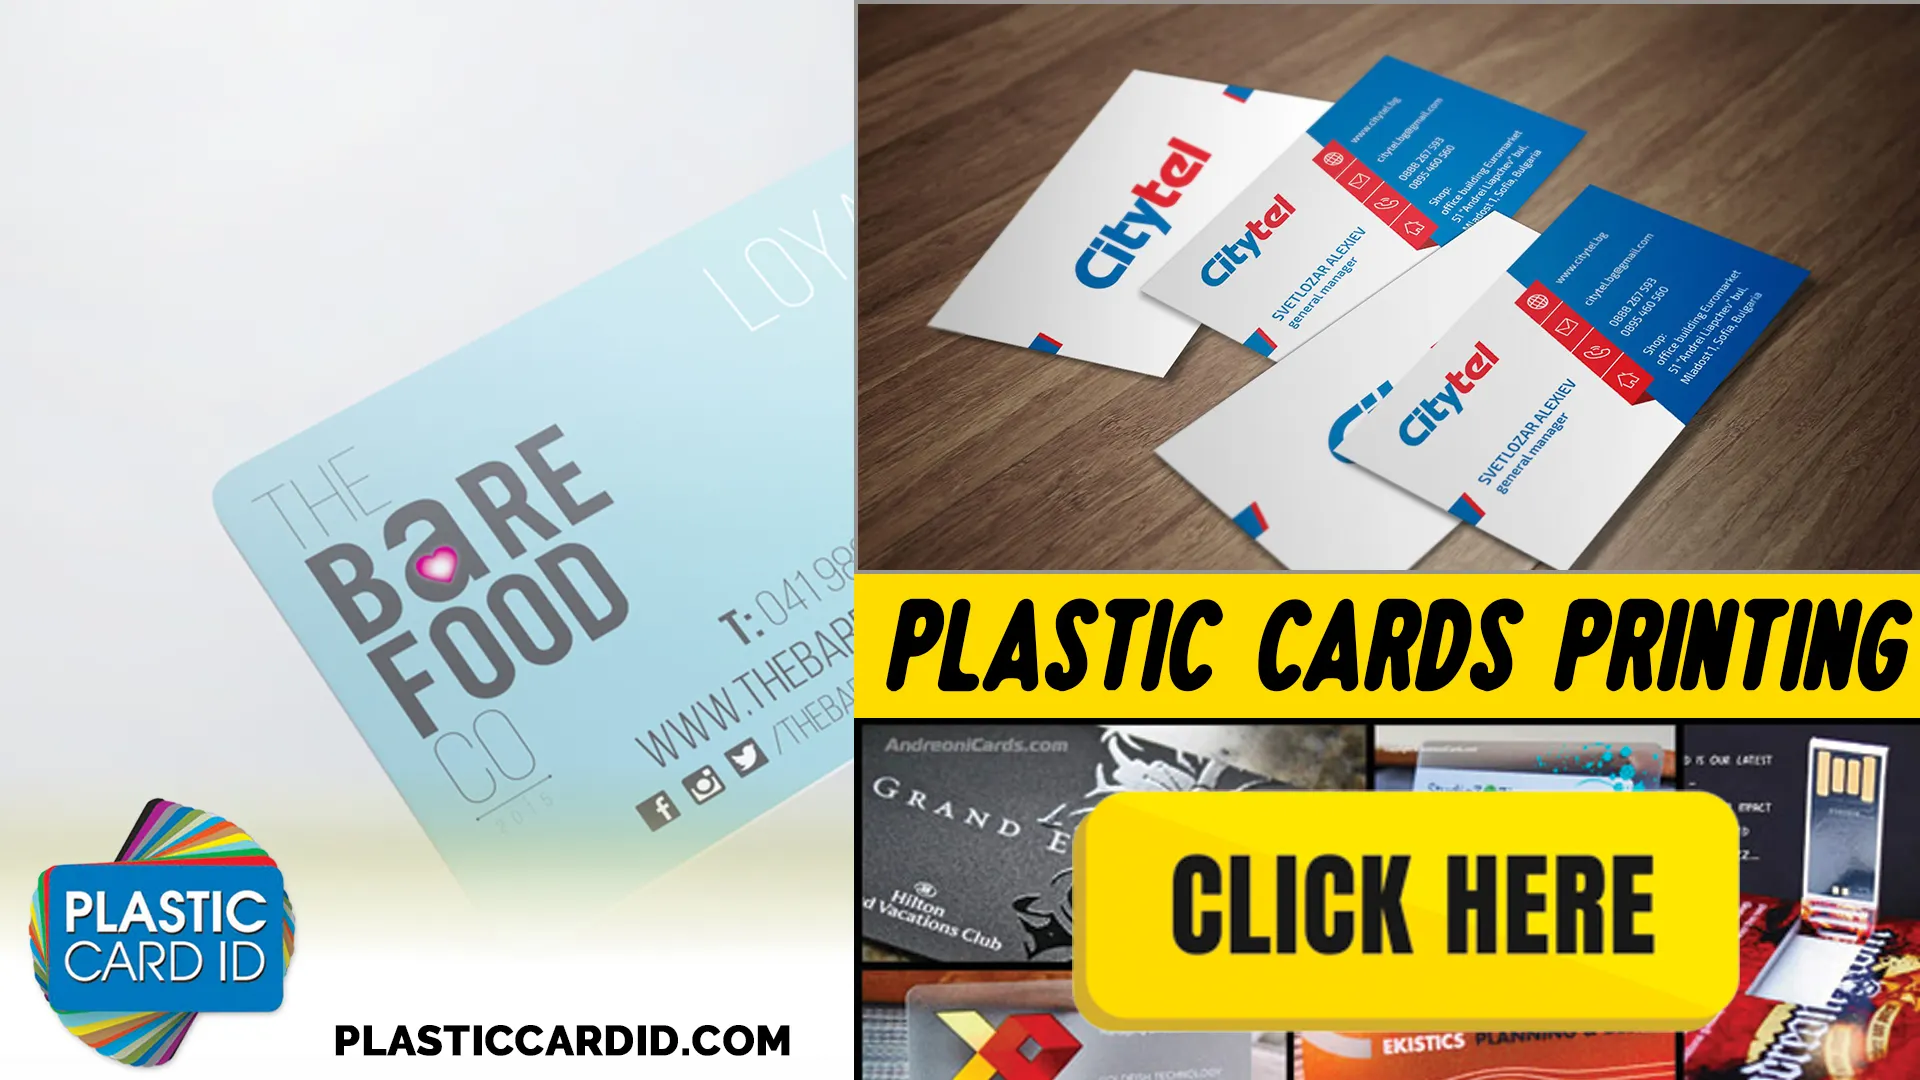 Welcome to Plastic Card ID




: Where Stunning Card Designs Amplify Your Brand